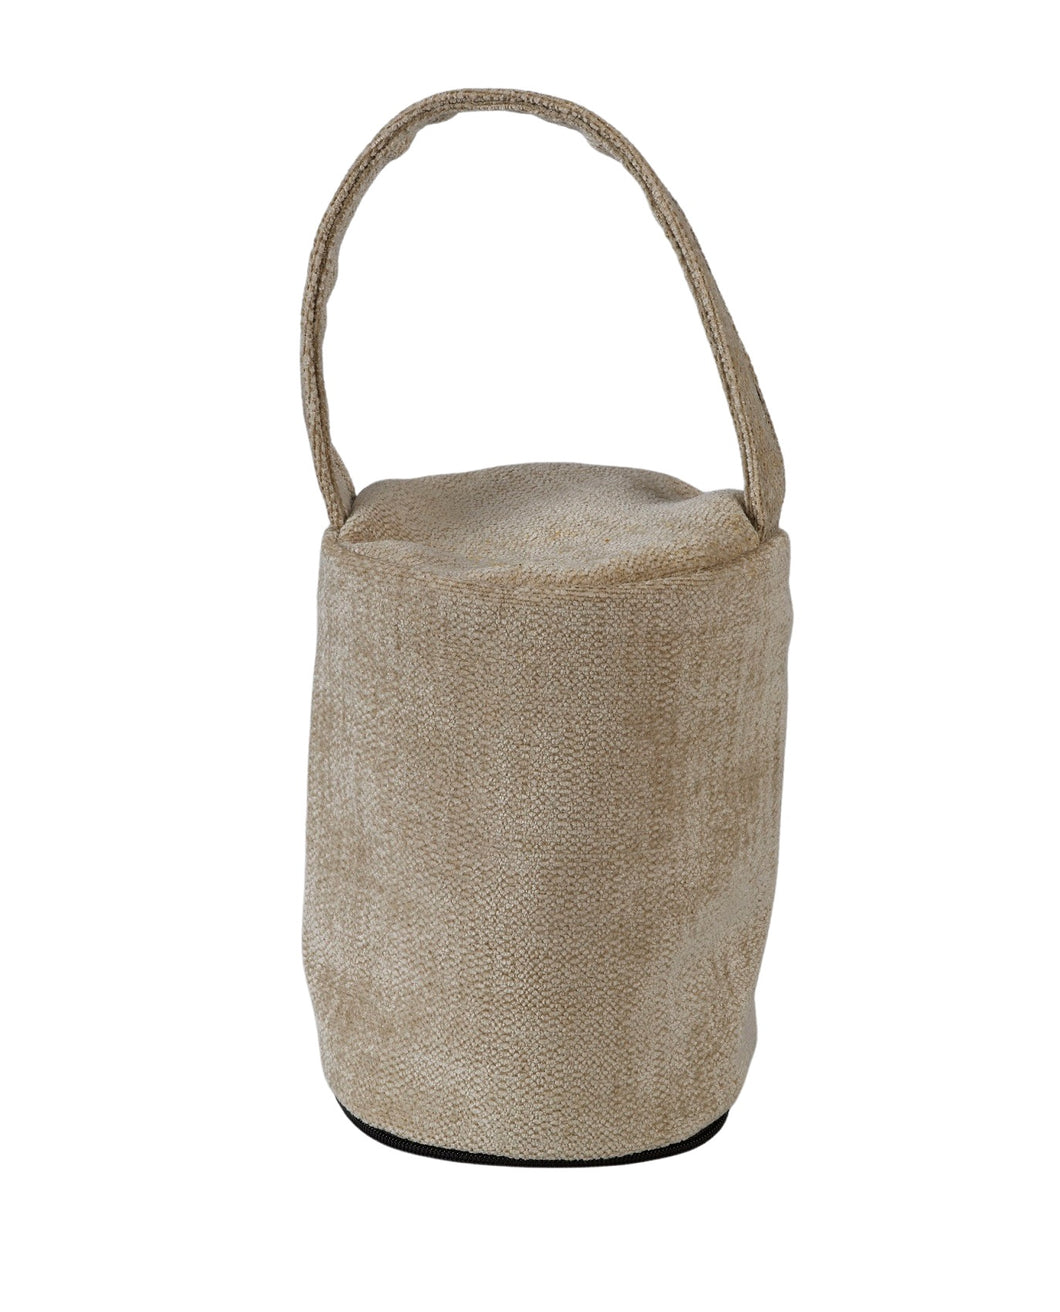 Chenille Doorstop Cover with Handle (Natural)